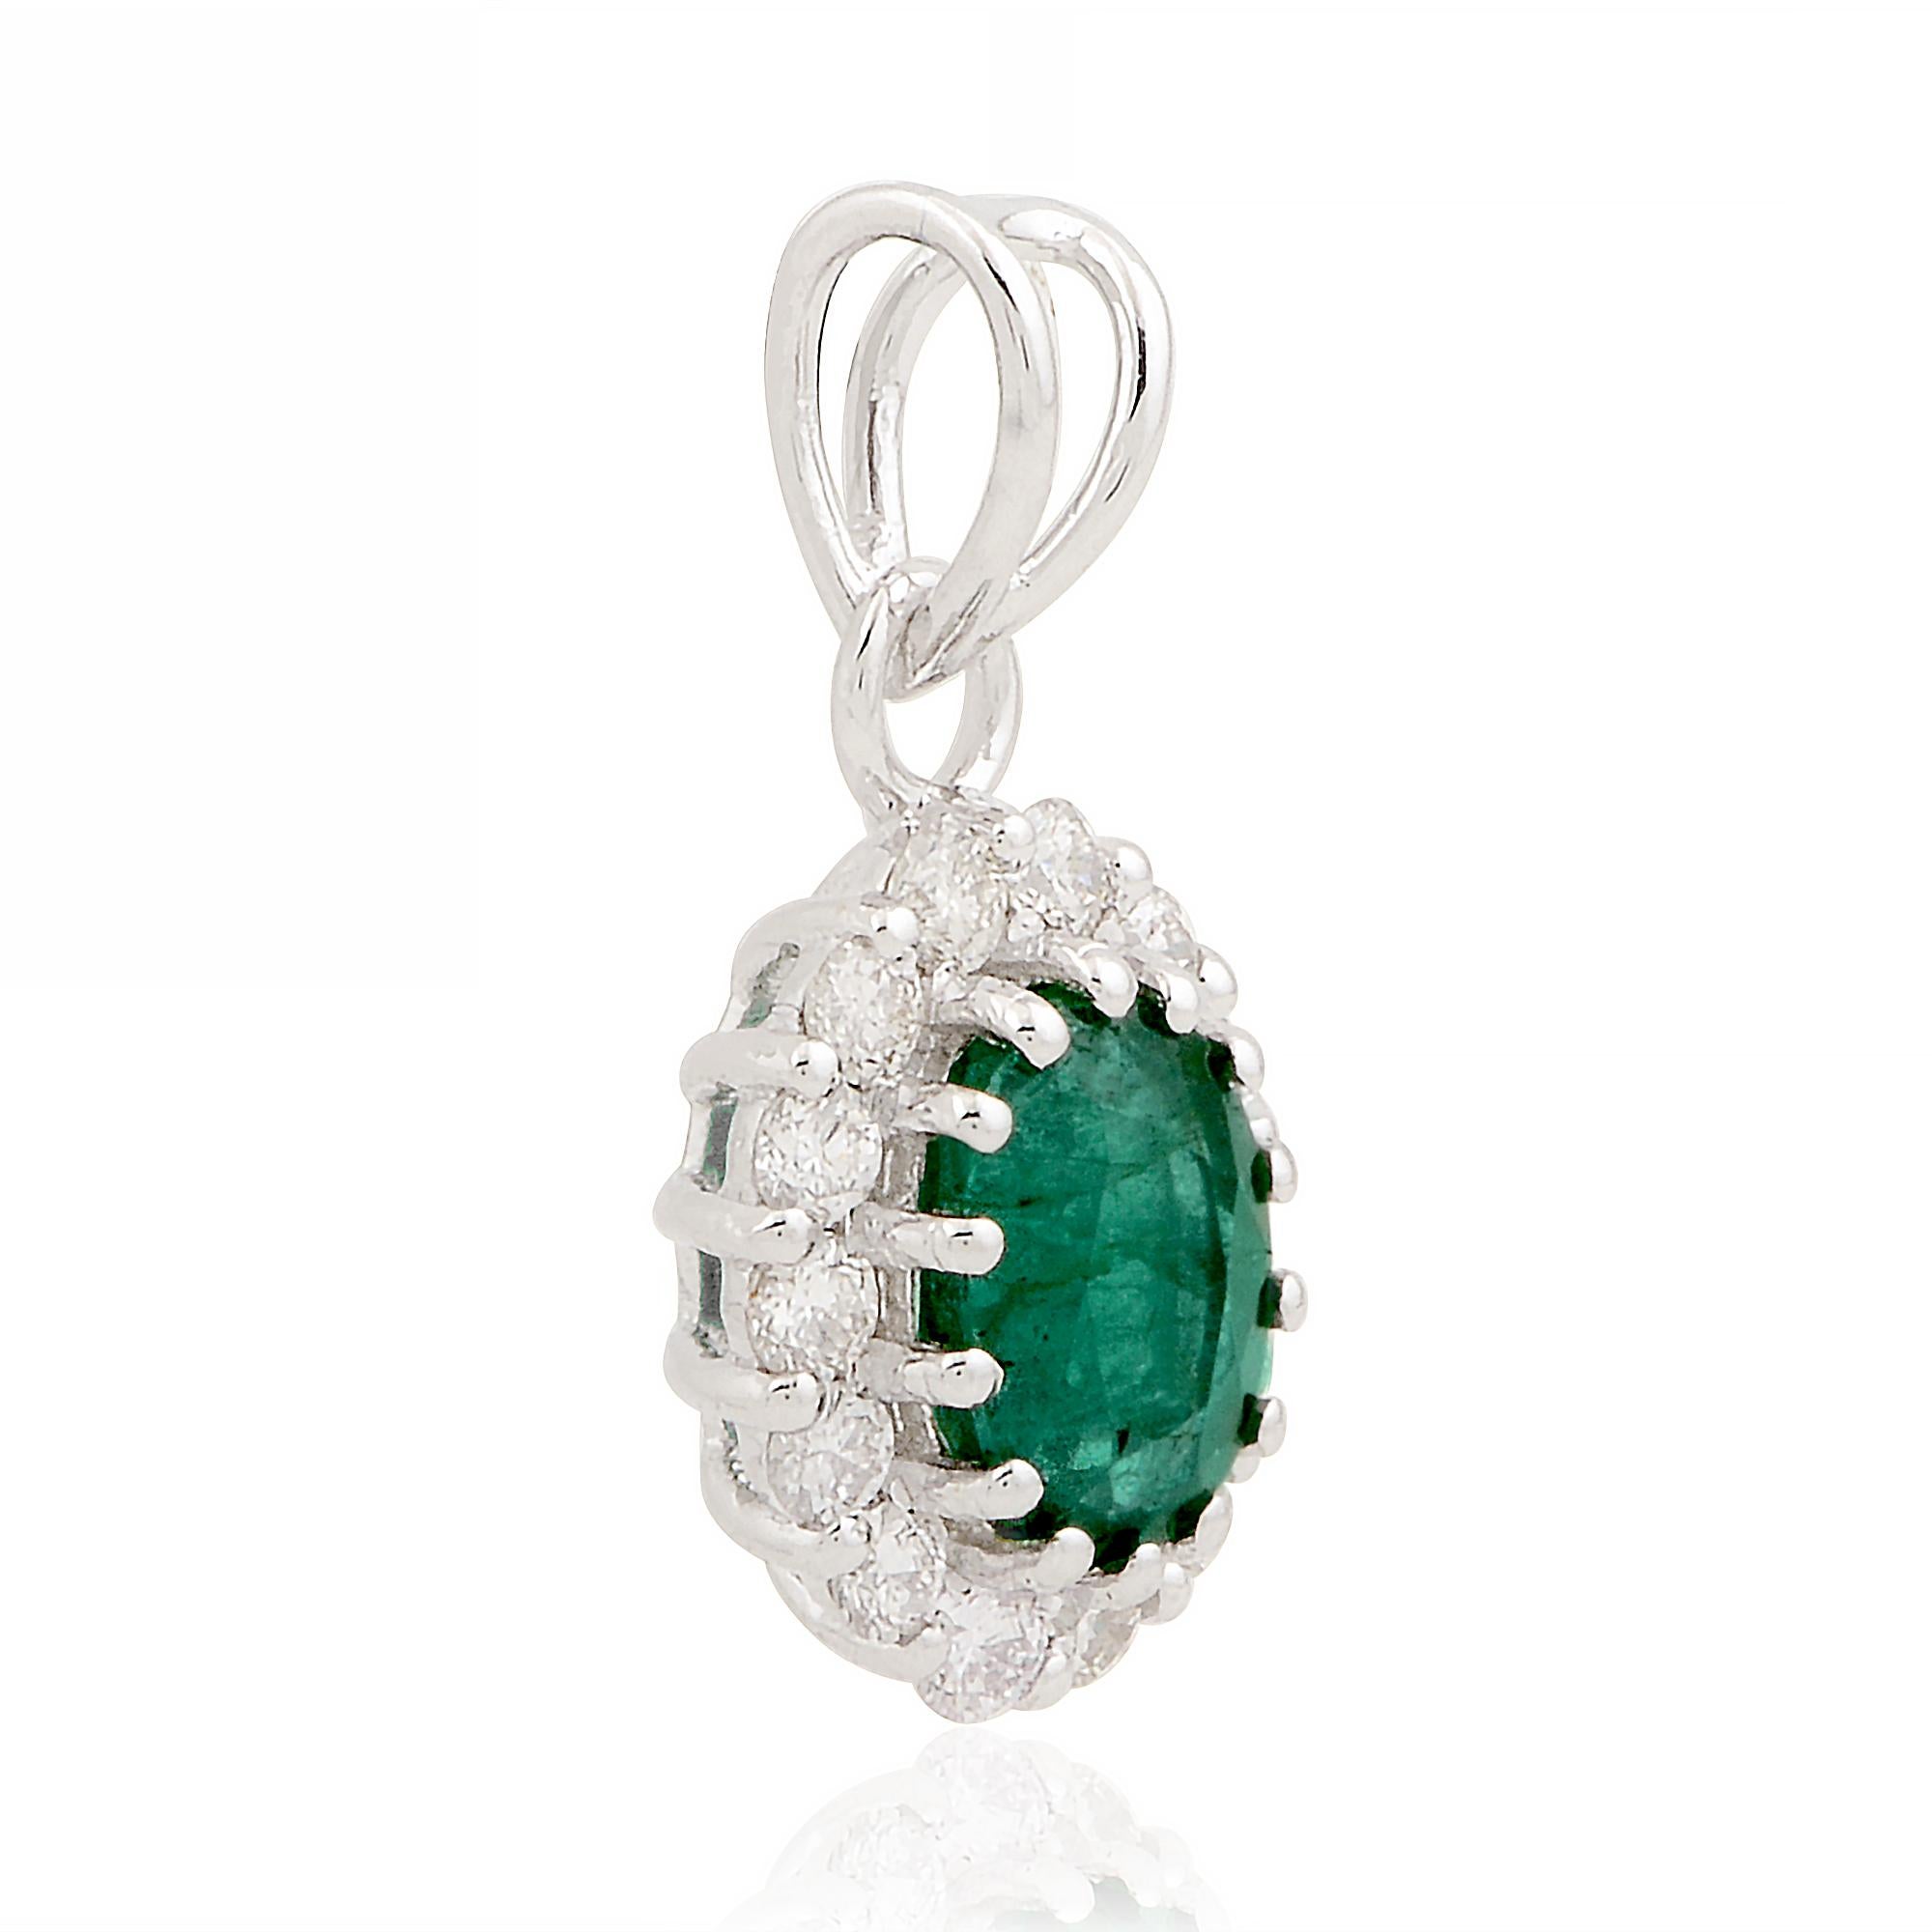 Elevate your jewelry collection with the enchanting beauty of this Oval Natural Emerald Charm Pendant. Crafted in 14k white gold, this exquisite piece showcases a captivating oval-shaped emerald and a sparkling pave diamond charm pendant.

Item Code